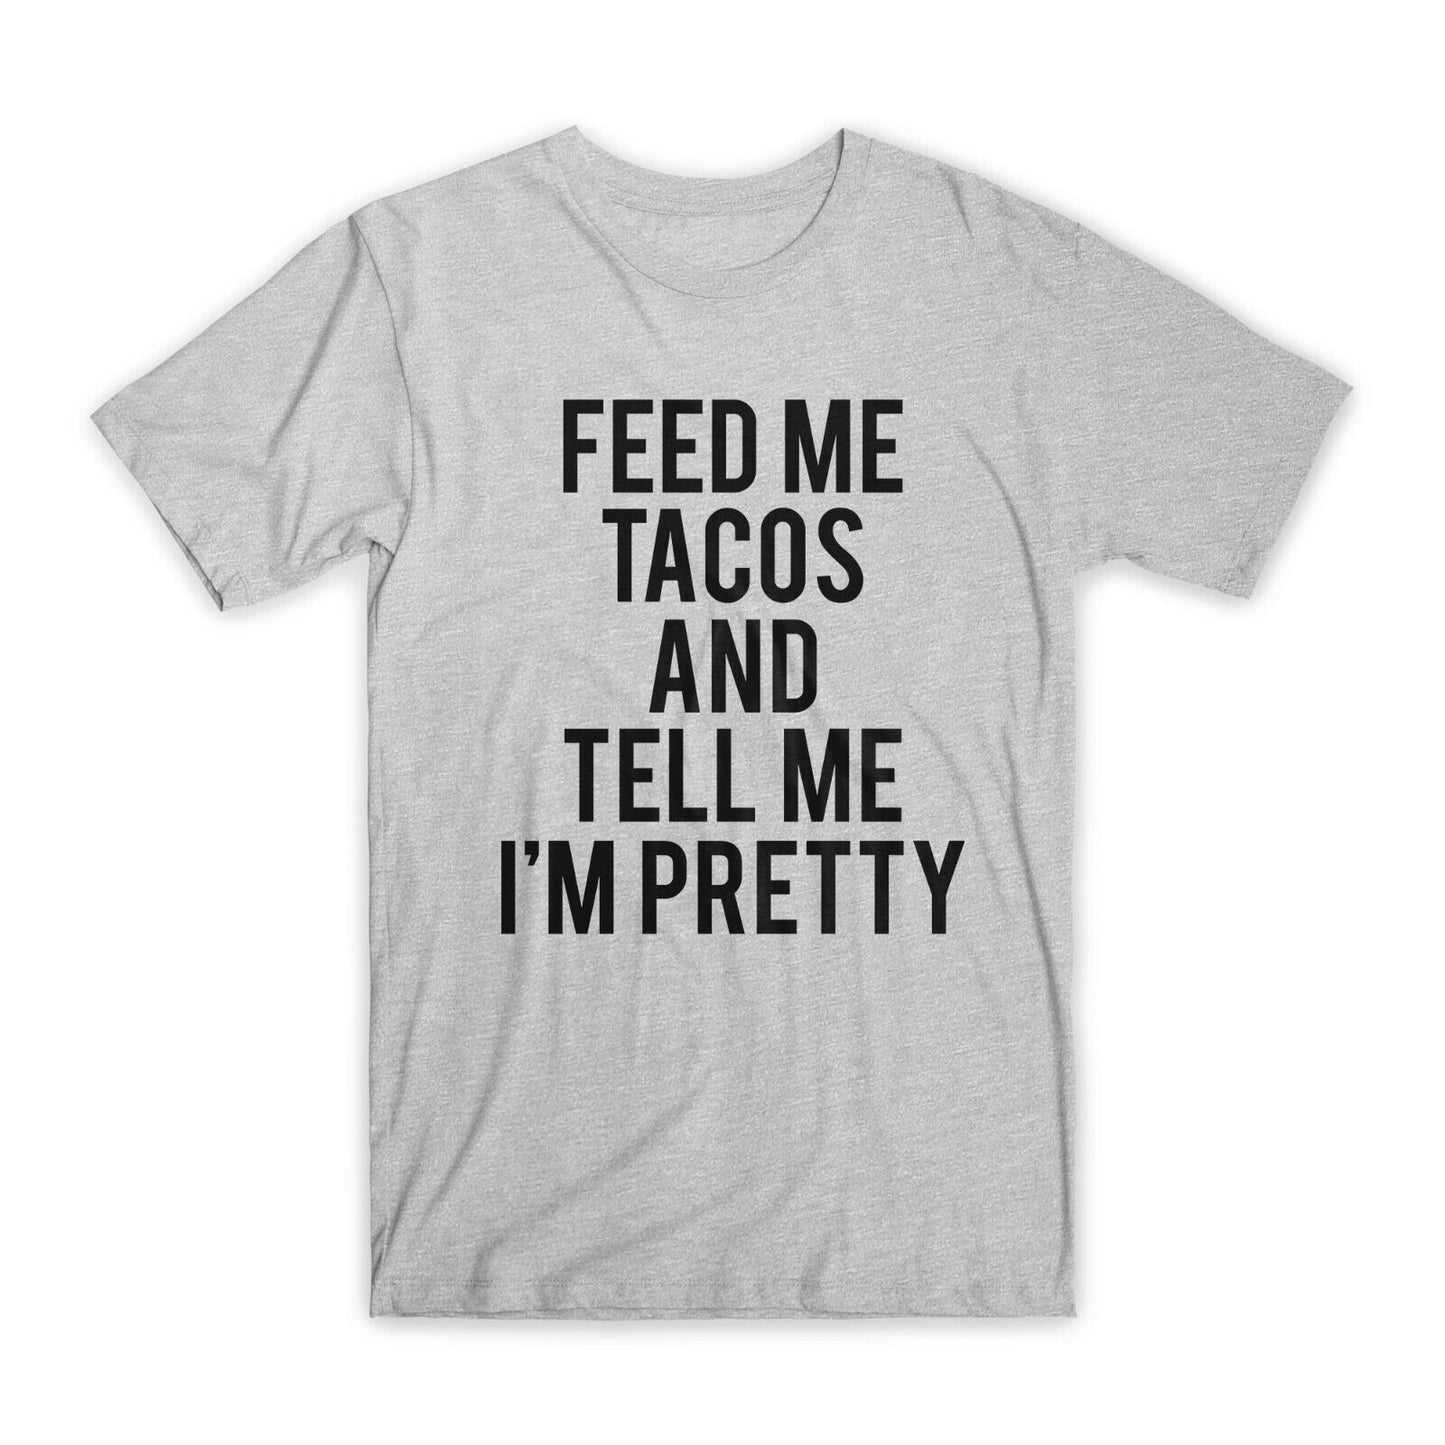 Feed Me Tacos and Tell Me I'm Pretty T-Shirt Premium Cotton Funny Tees Gift NEW